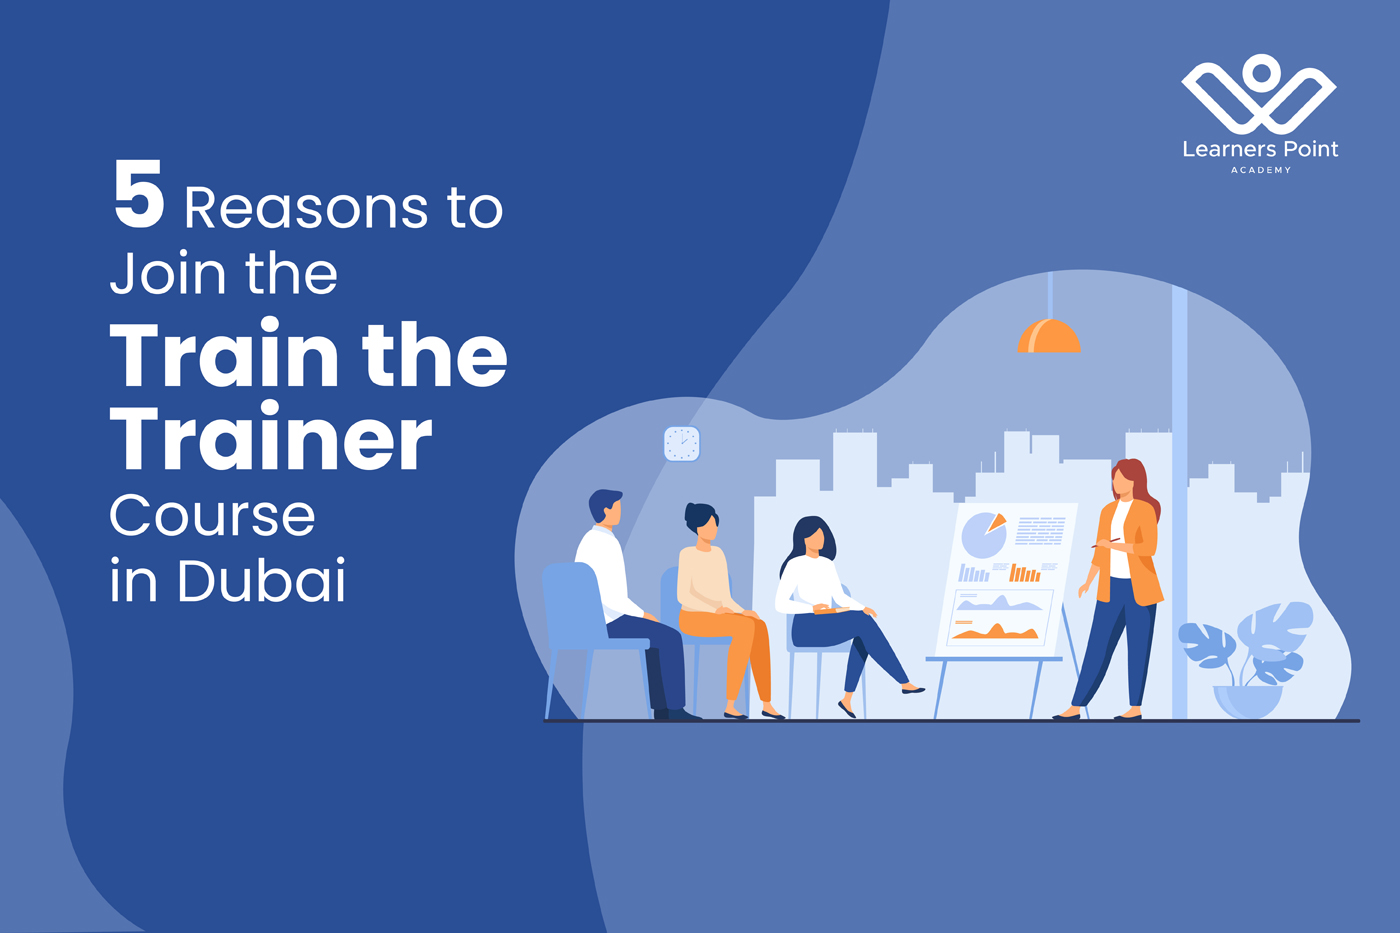 5 Reasons to Join the Train the Trainer Course in Dubai